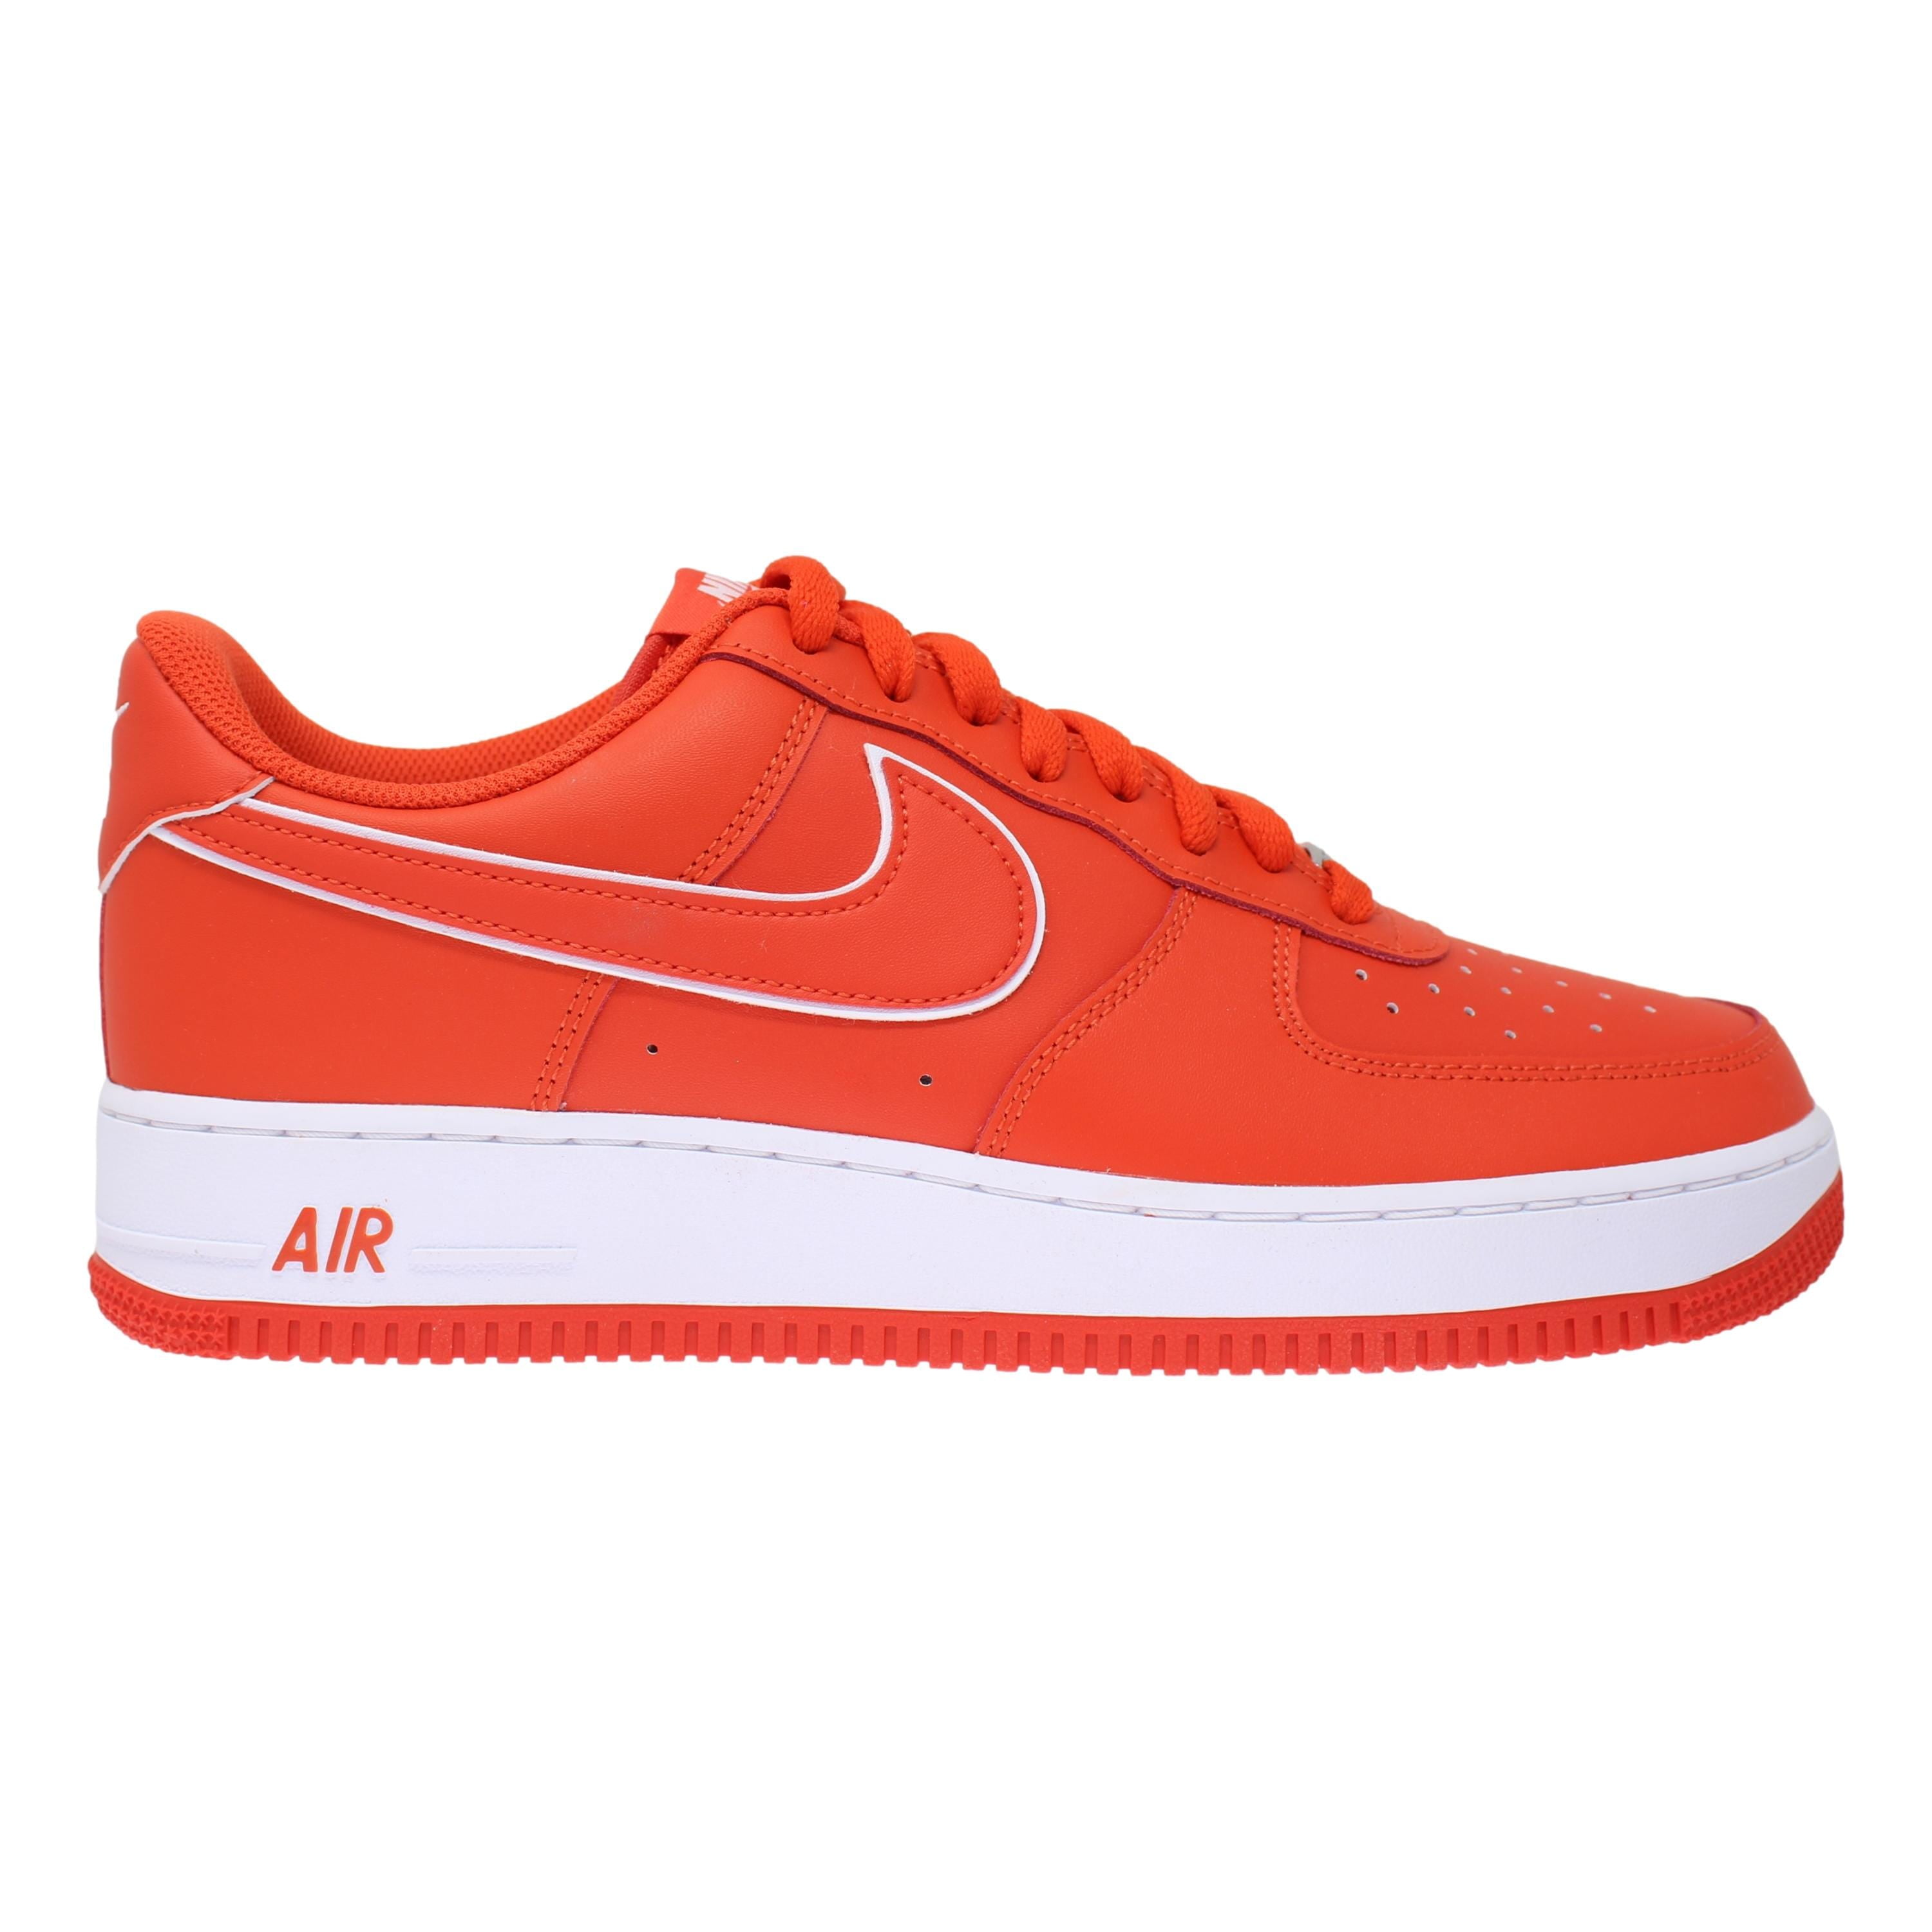 Nike Air Force 1 Low 07 Mens Size 13 Picante Red White DV0788 600